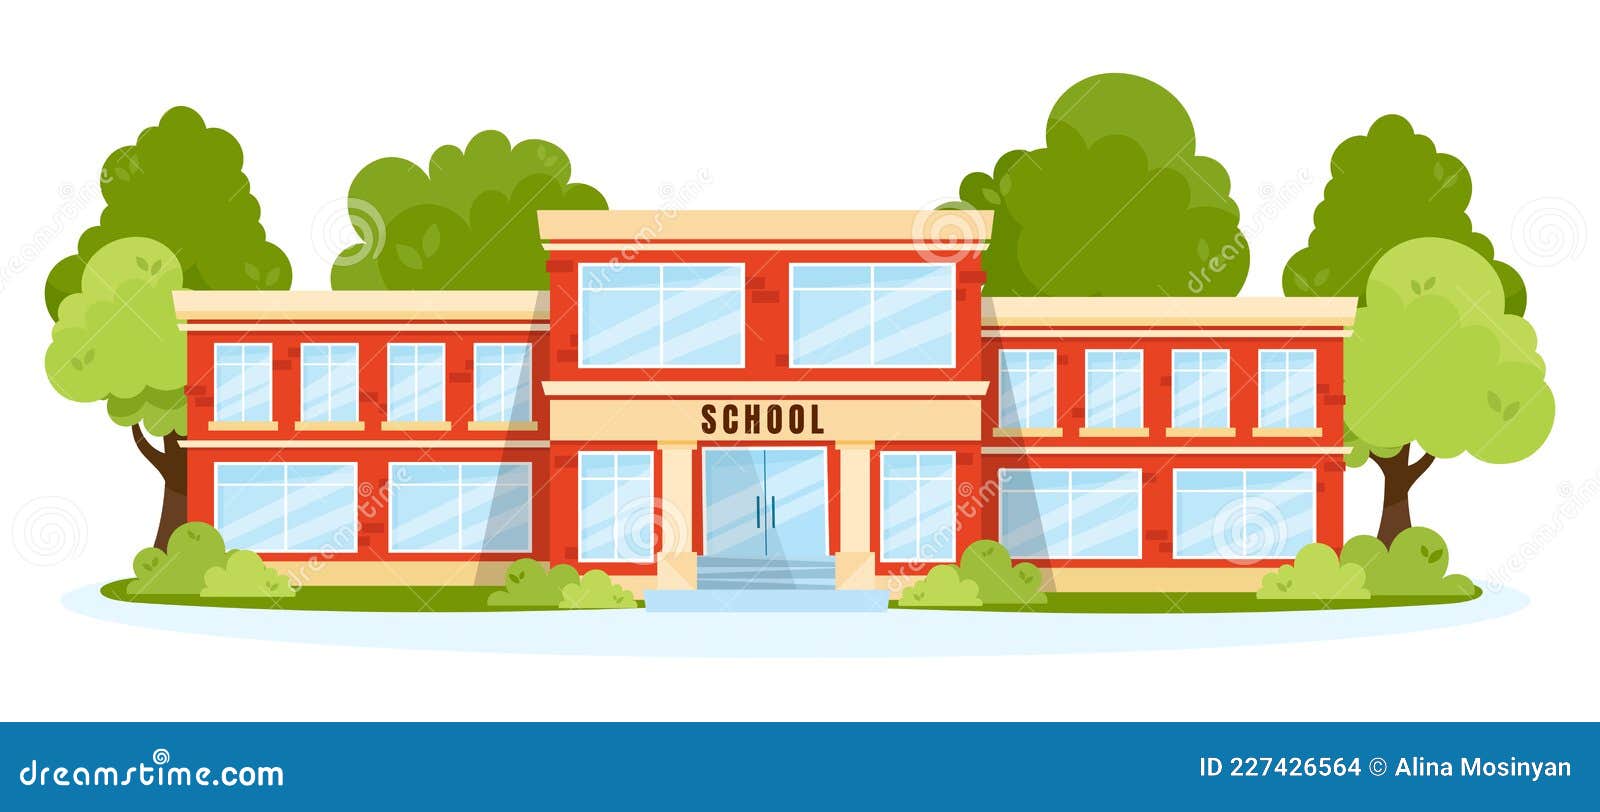 Front View of a Classic School Building with Big Windows and Doors. Flat,  Cartoon Style Vector Illustration Stock Vector - Illustration of text,  play: 227426564